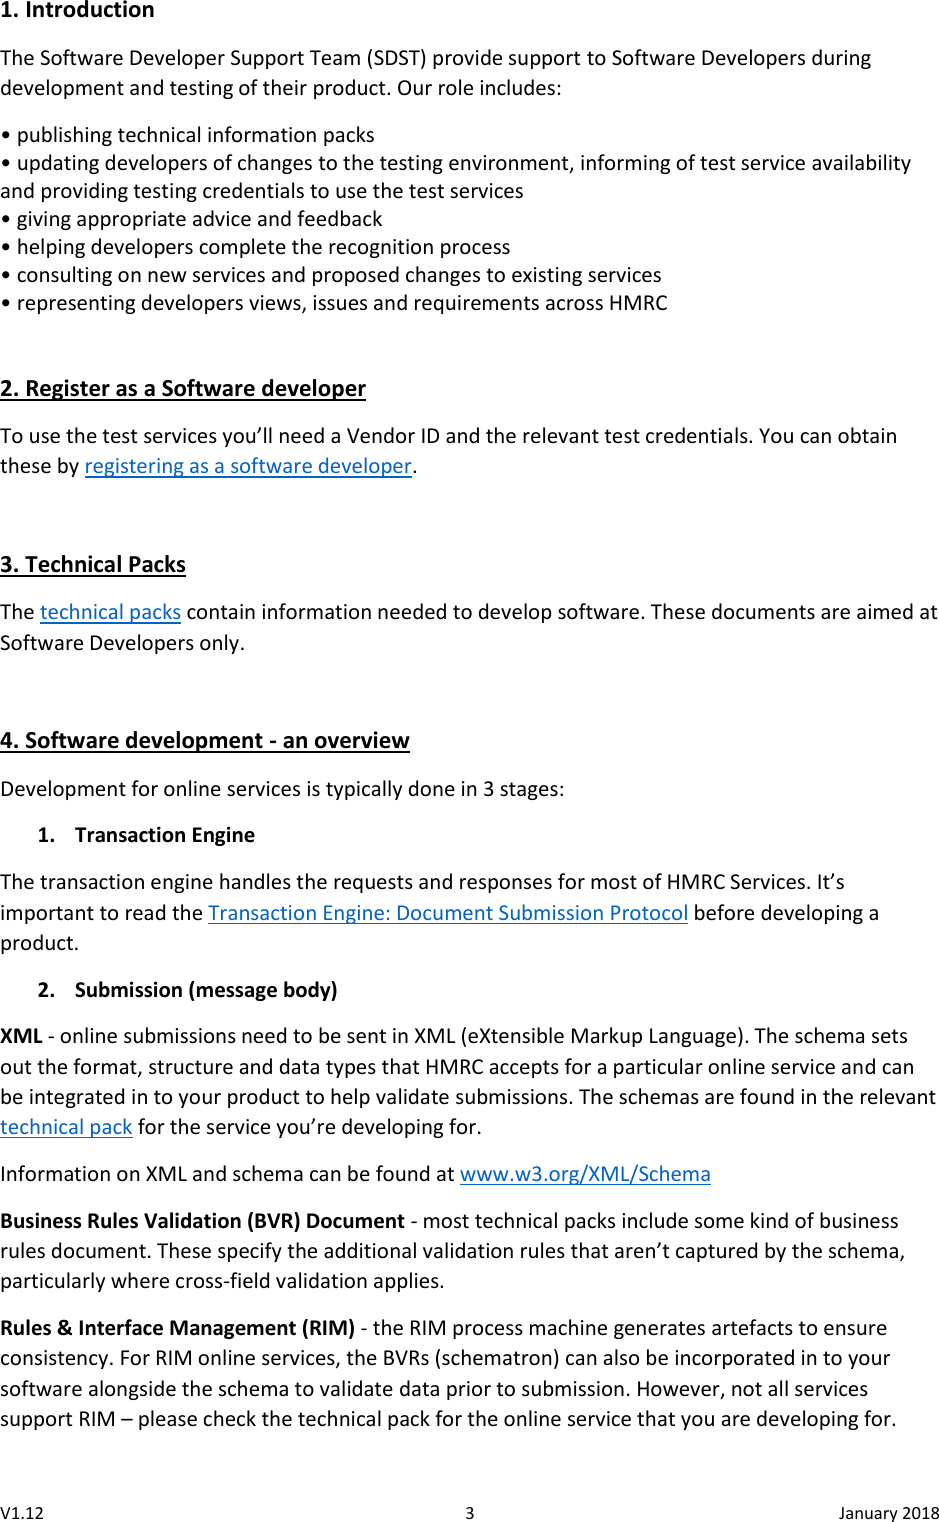 Page 3 of 7 - Basic Guide For Software Developers